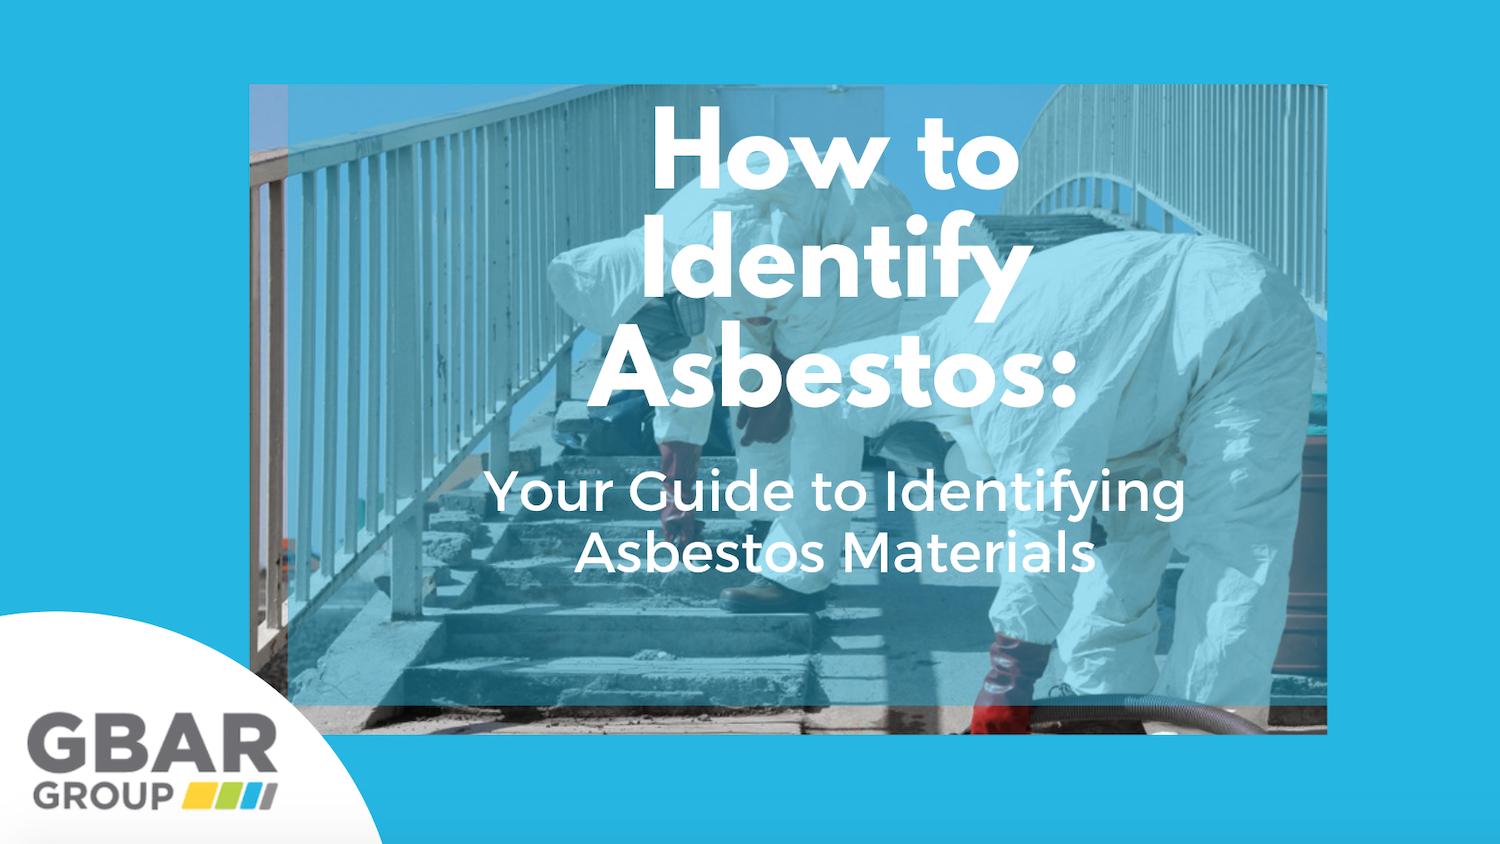 How To Identify Asbestos Your Guide, Vinyl Asbestos Floor Tiles And Sheet Flooring Identification Photo Guide